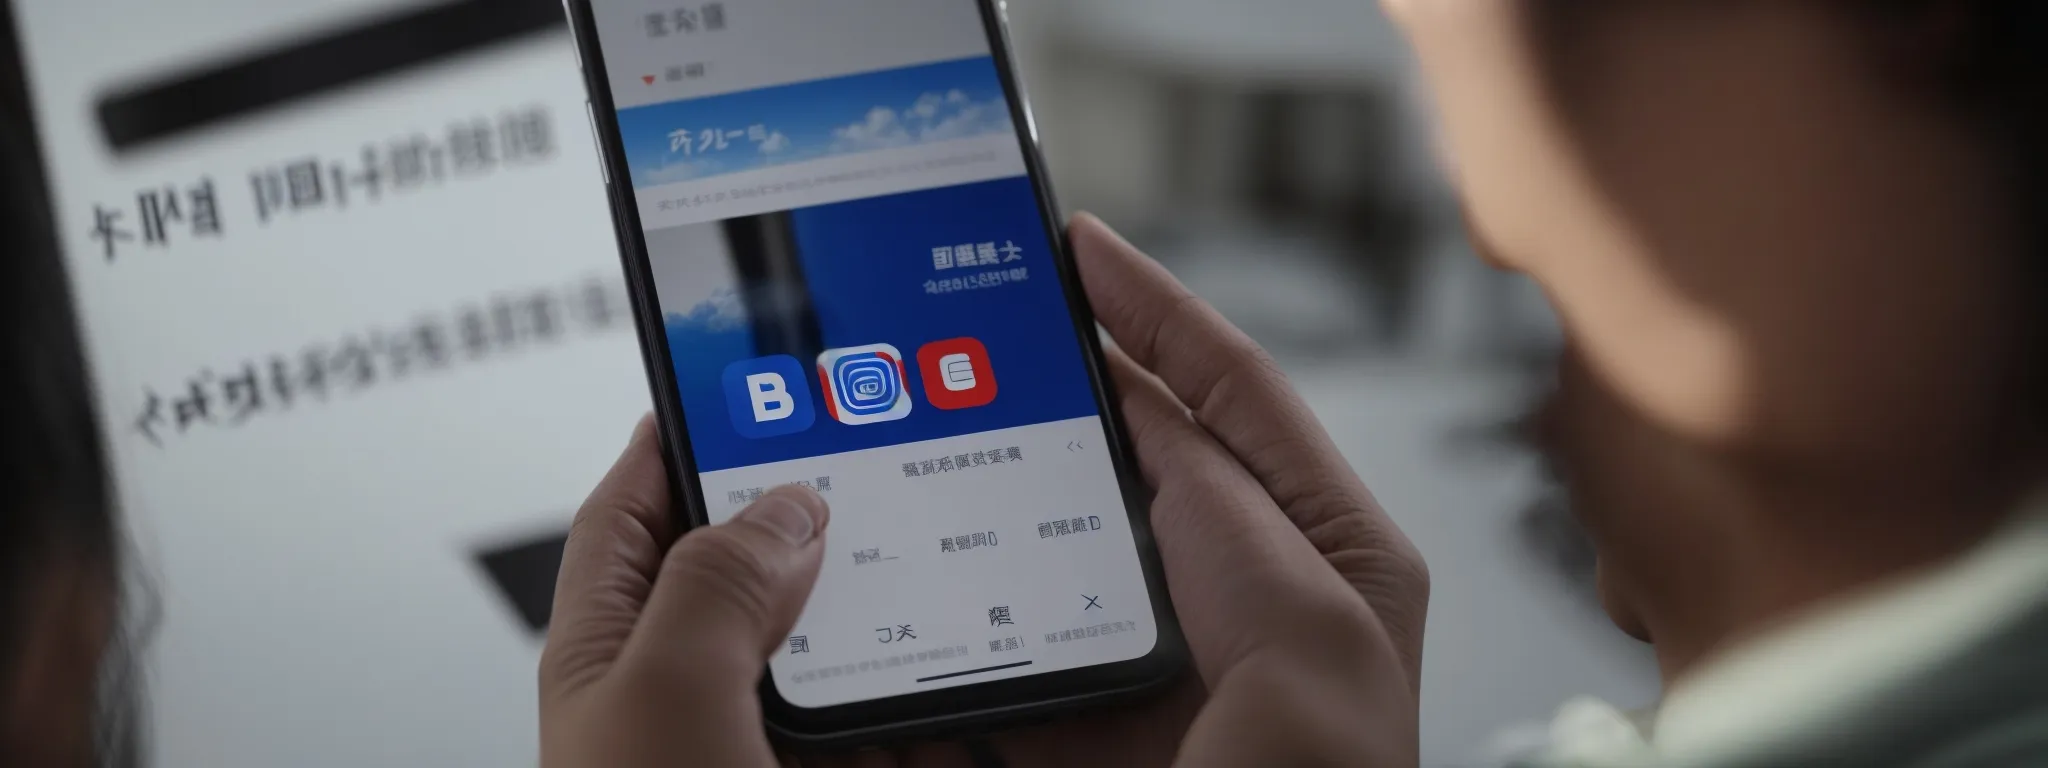 a person using a smartphone with baidu's homepage visible on the screen, symbolizing mobile web browsing in china.